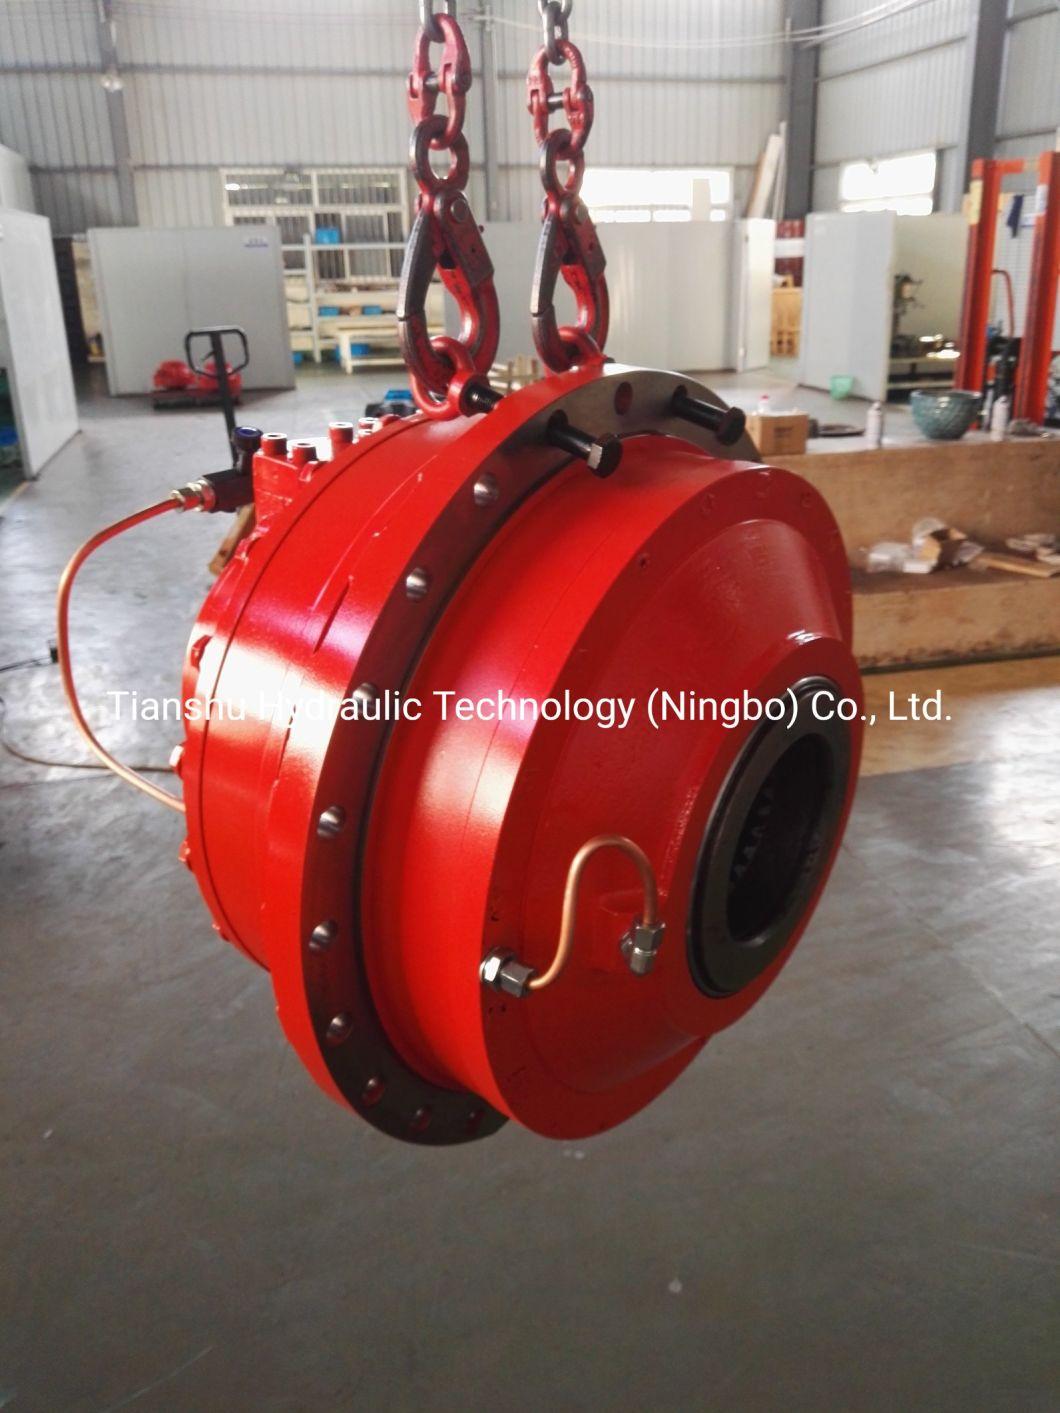 Chinese Factory Sales Winch Hydraulic Radial Piston Rexroth Hagglunds Motor Drive Usded in Ship Anchor Winch